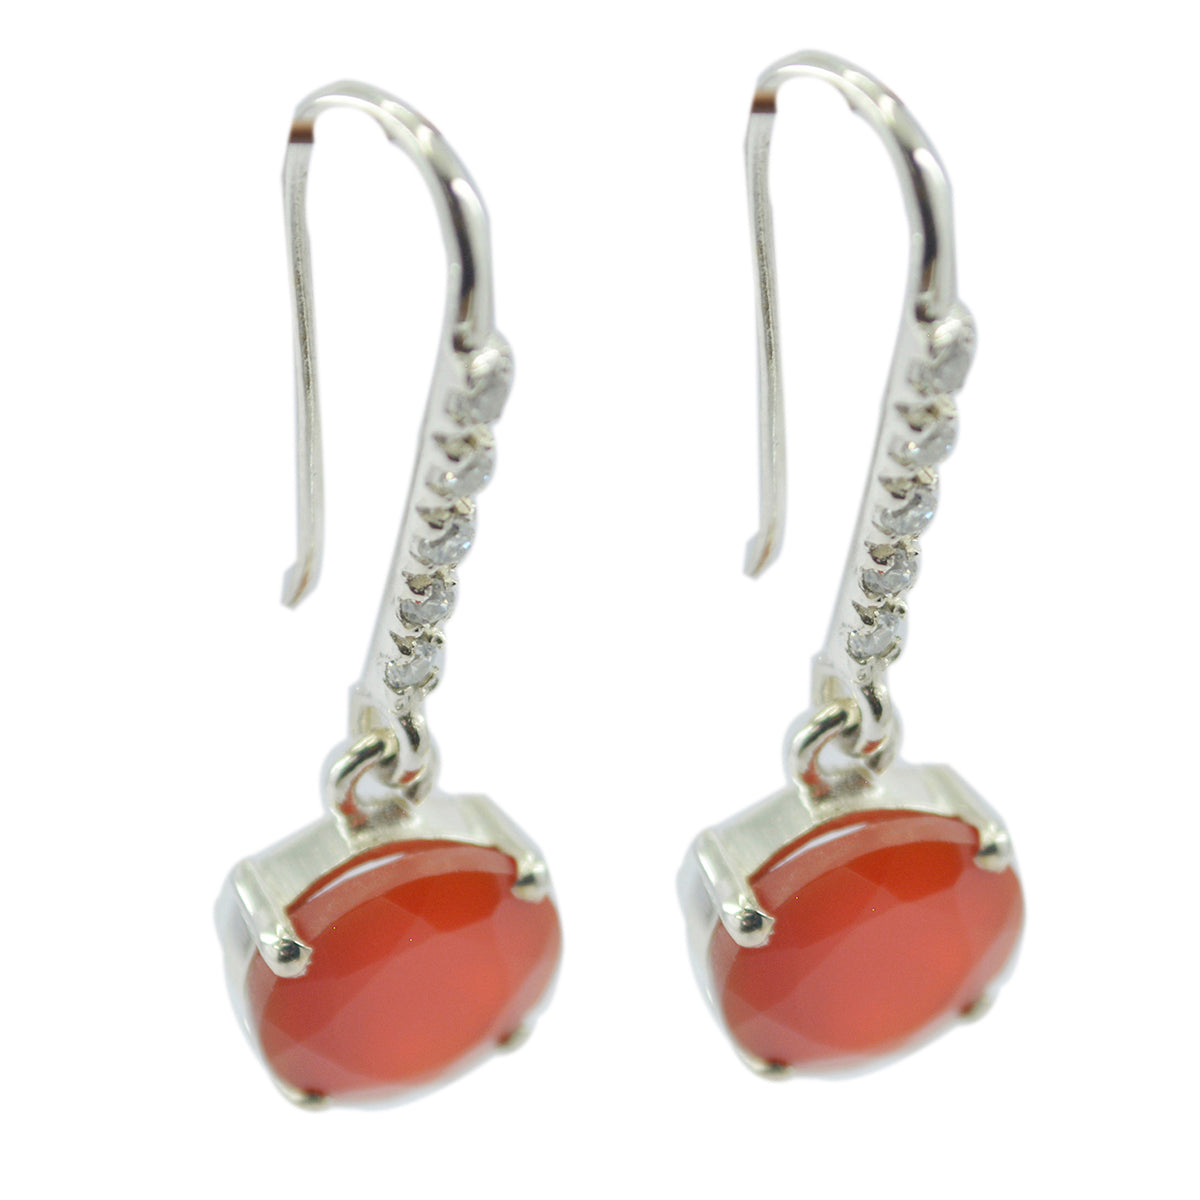 Riyo Natural Gemstone round Faceted Red Onyx Silver Earrings gift for grandmother